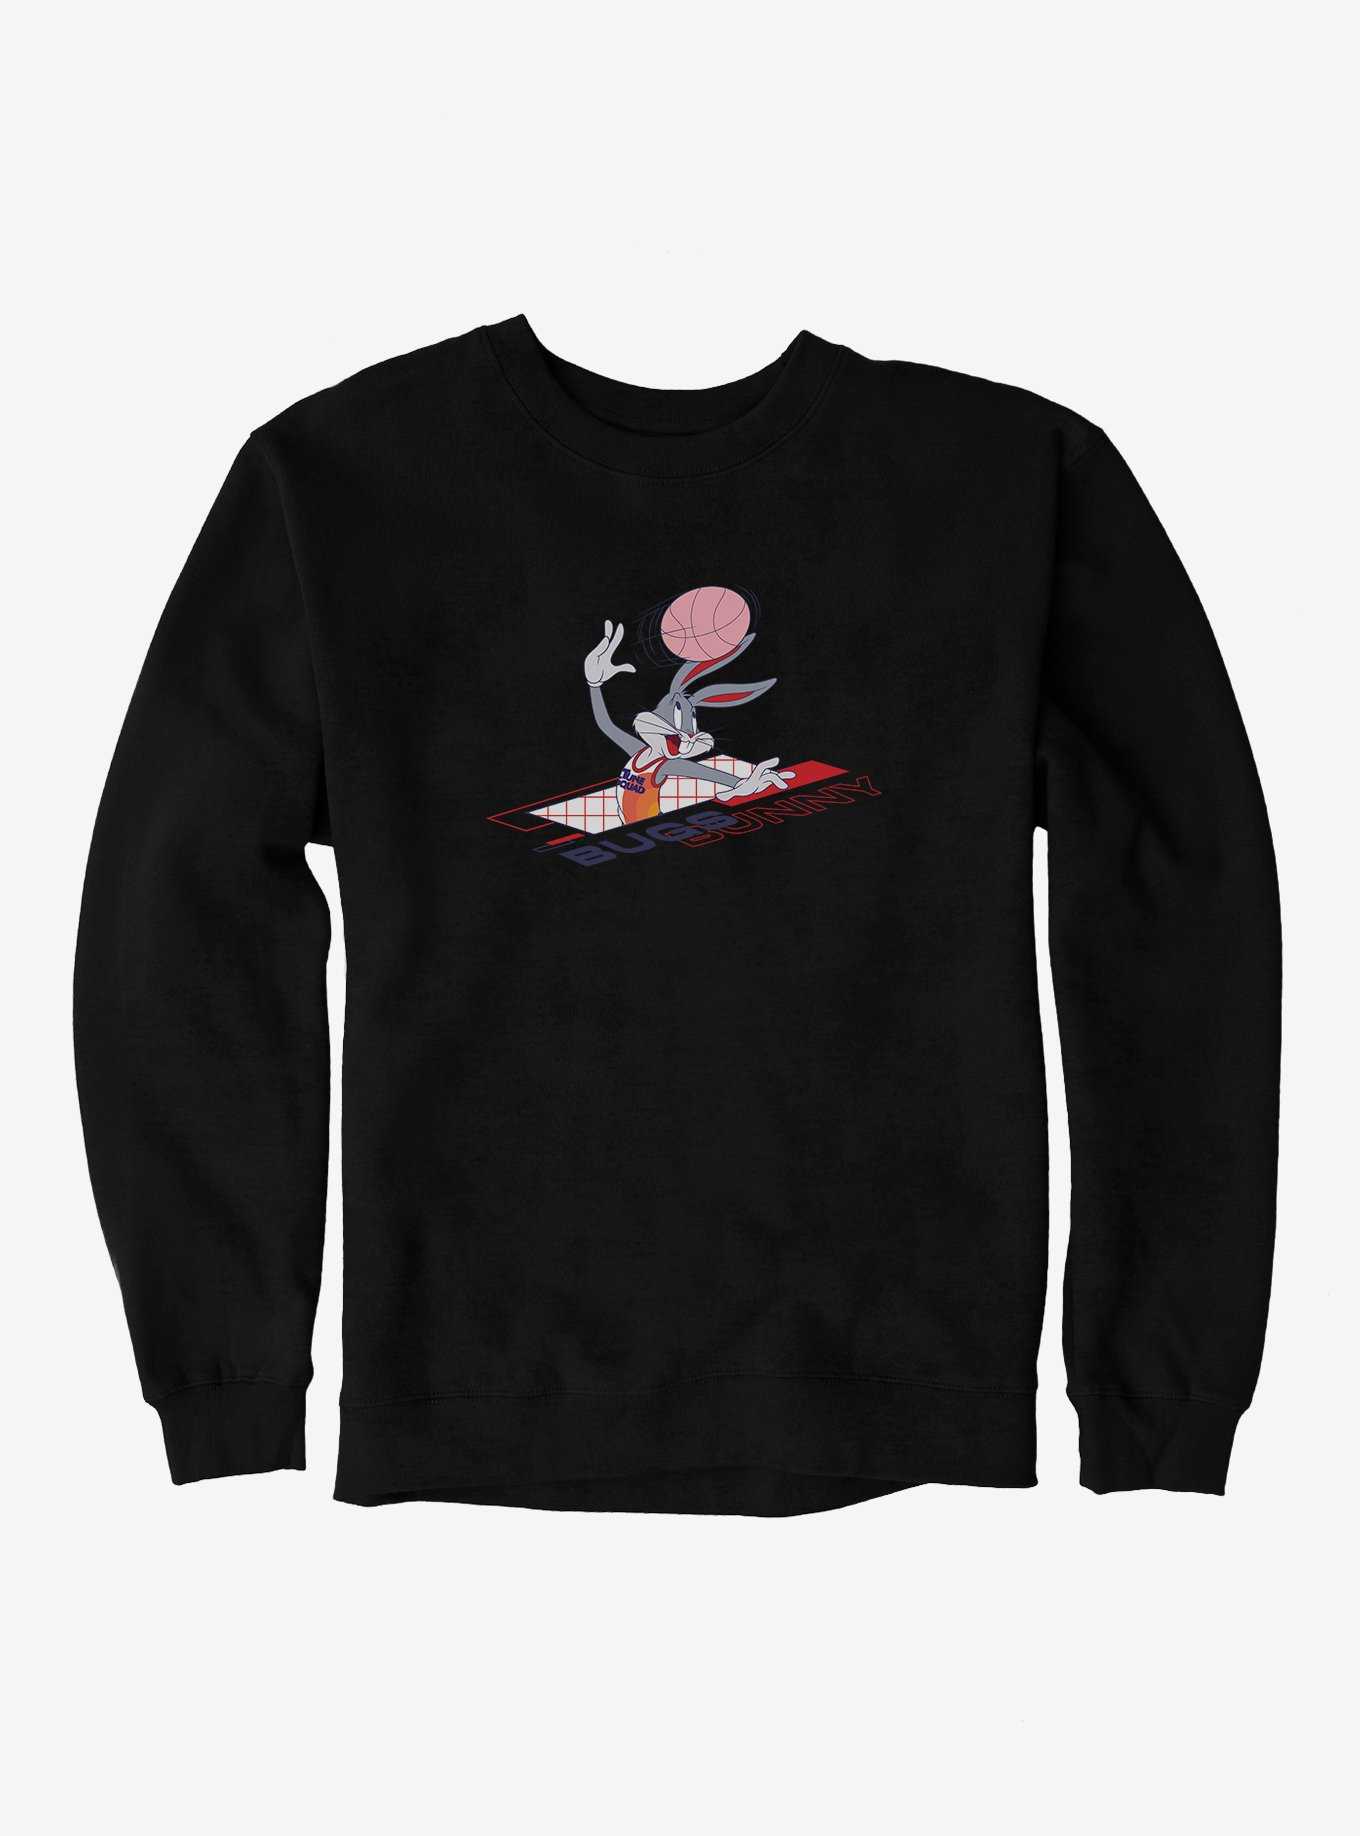 Space Jam: A New Legacy Bugs Bunny Leaving The Grid Sweatshirt, , hi-res